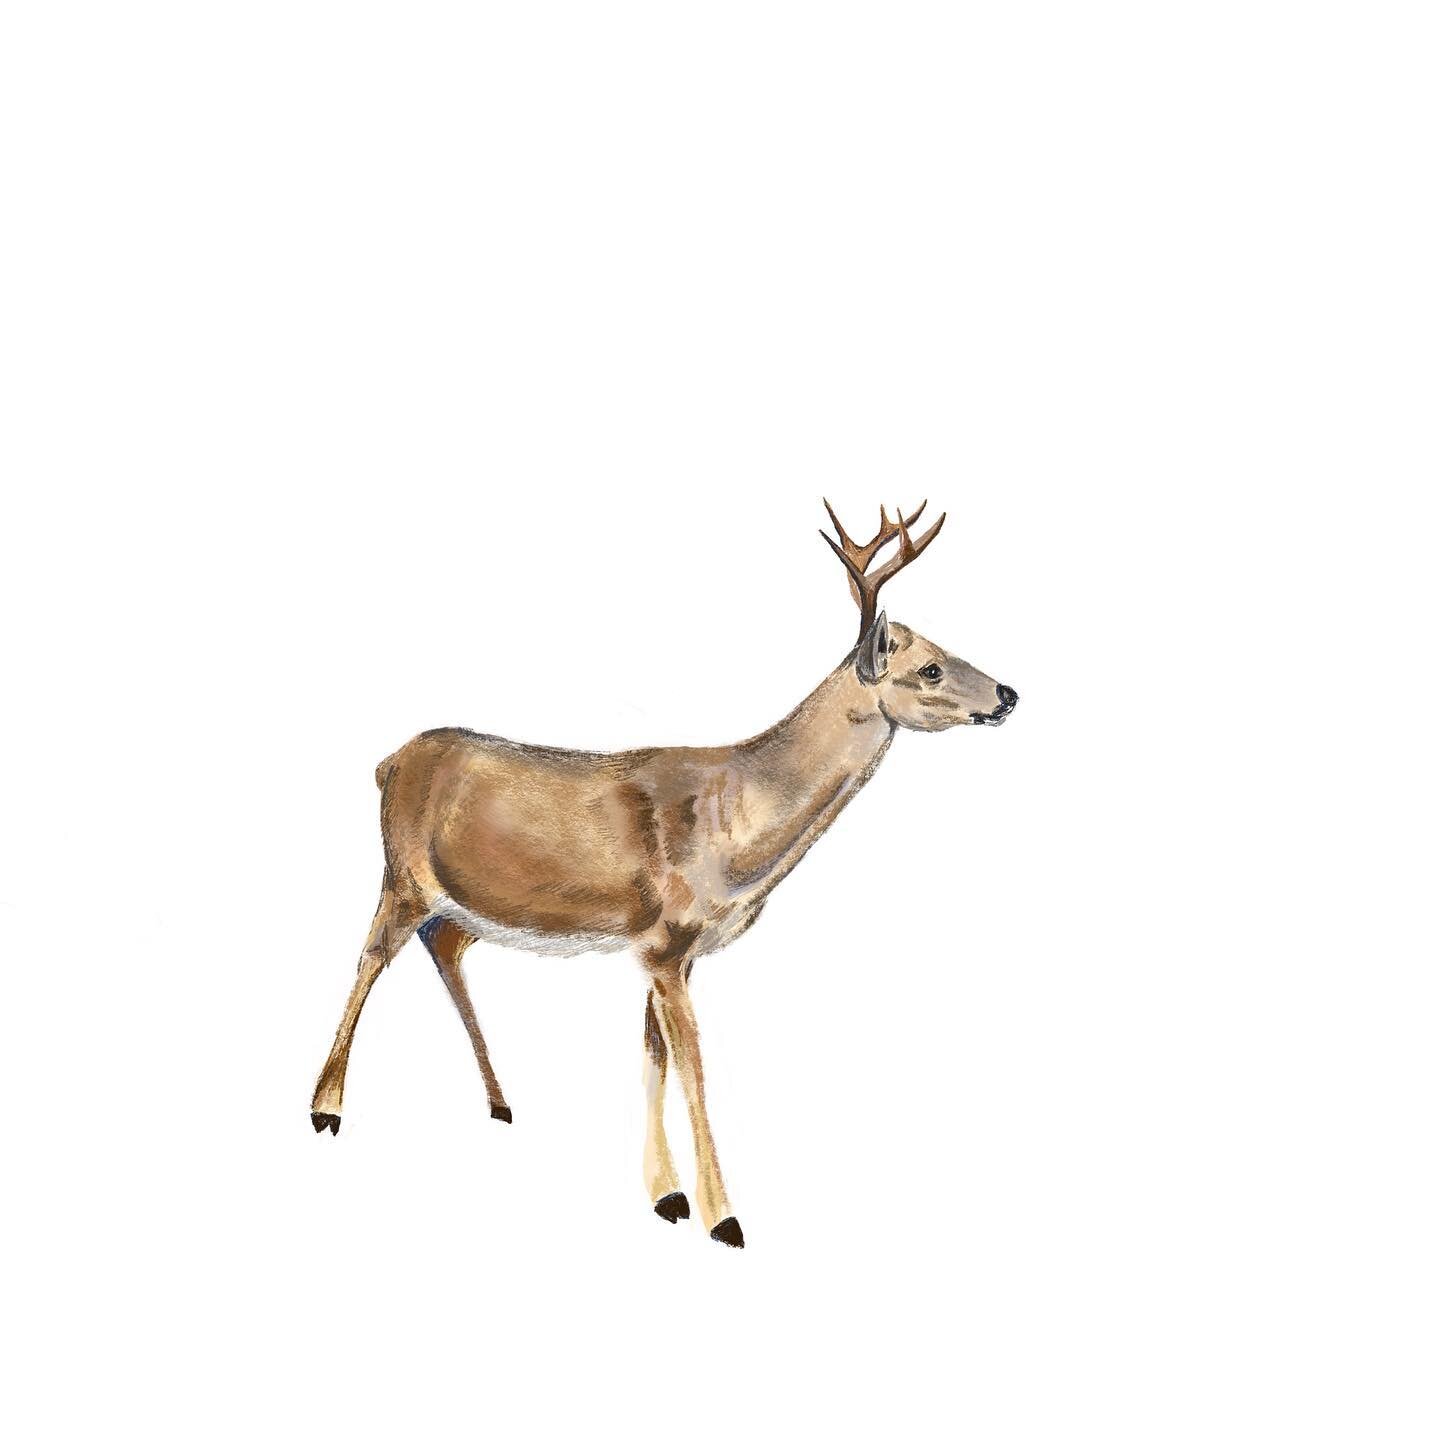 Key Deer. Endangered. The Key deer is a very small subspecies of white-tailed deer that is endemic to the Florida Keys. Fully-grown adults only average 26&rdquo; high at the shoulder. There are only 700-800 of these deer remaining, and they are threa